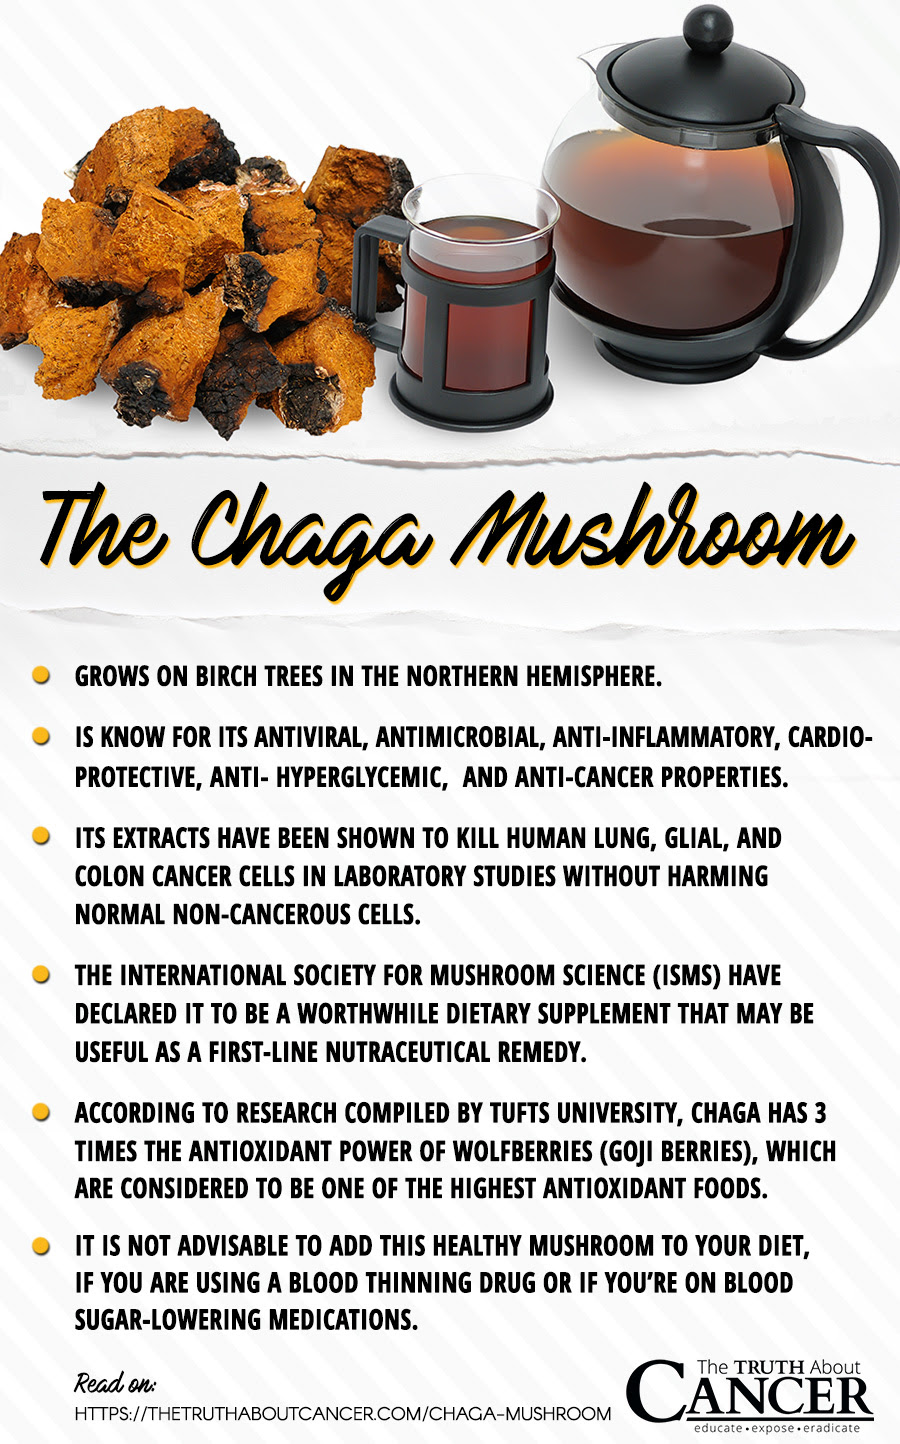 Chaga Mushroom facts backed by studies. Click on the image to read the full article on The Truth About Cancer.